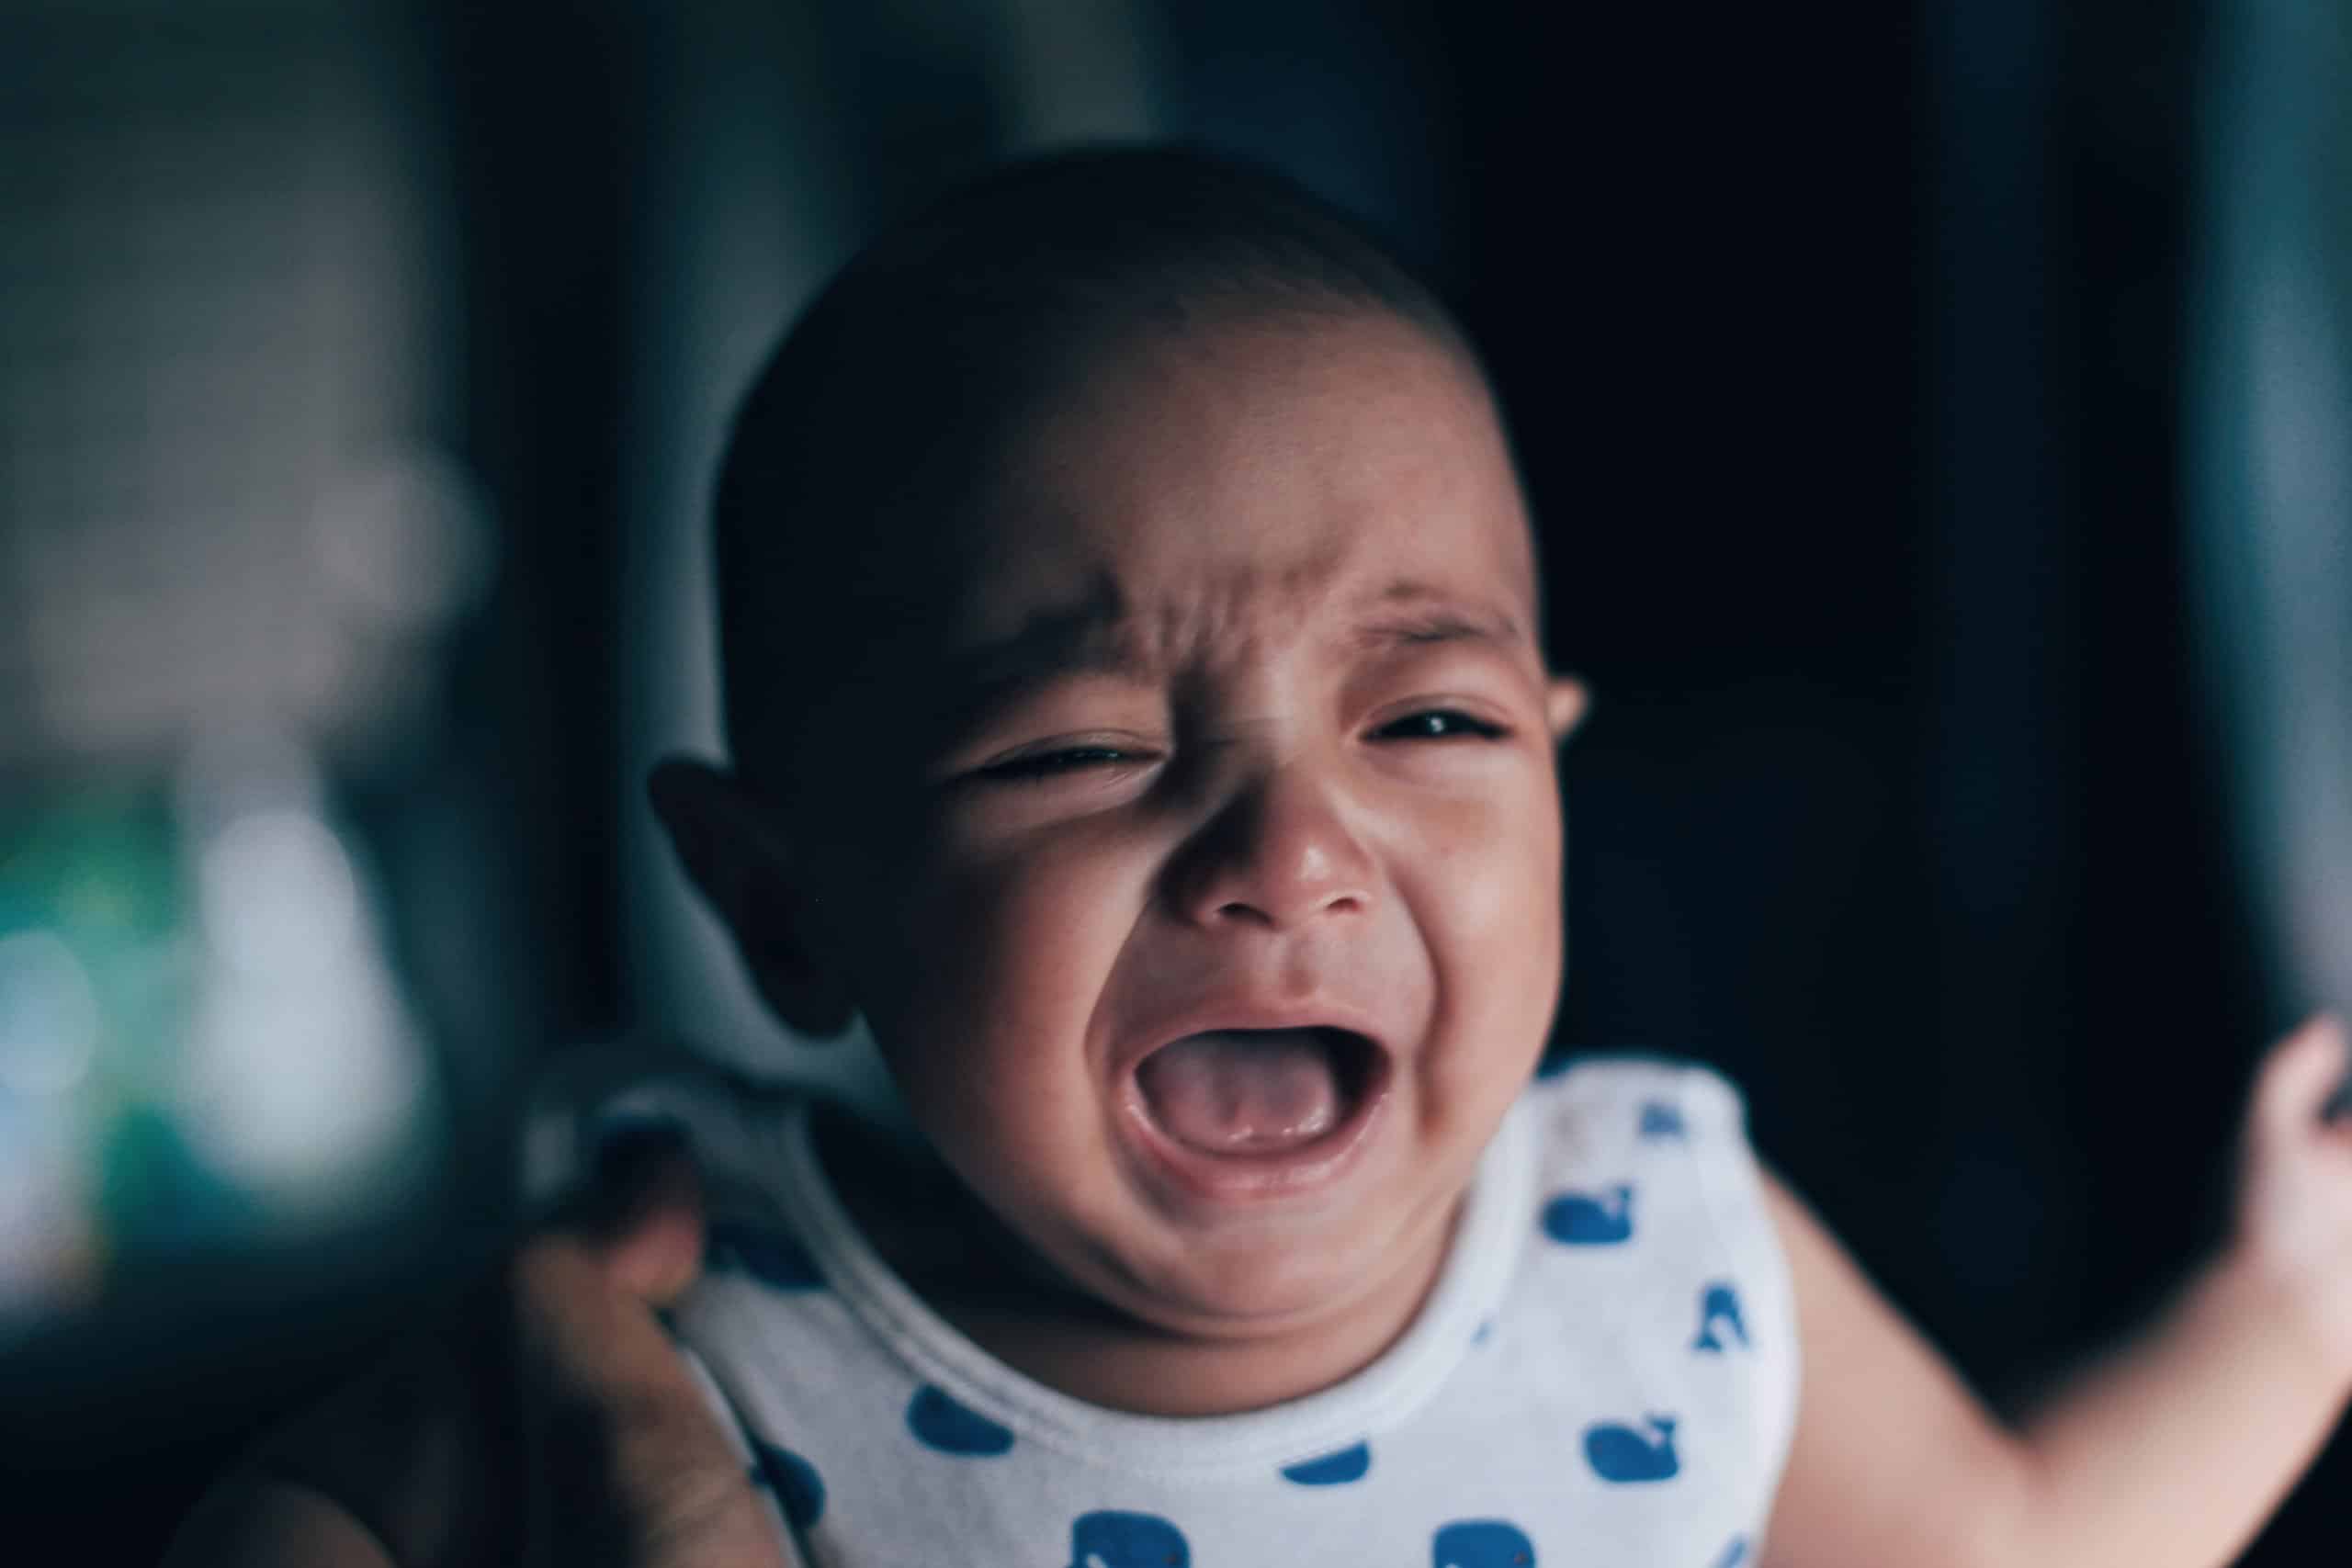 Baby Development Stages Crying: Understanding Your Baby’s Needs